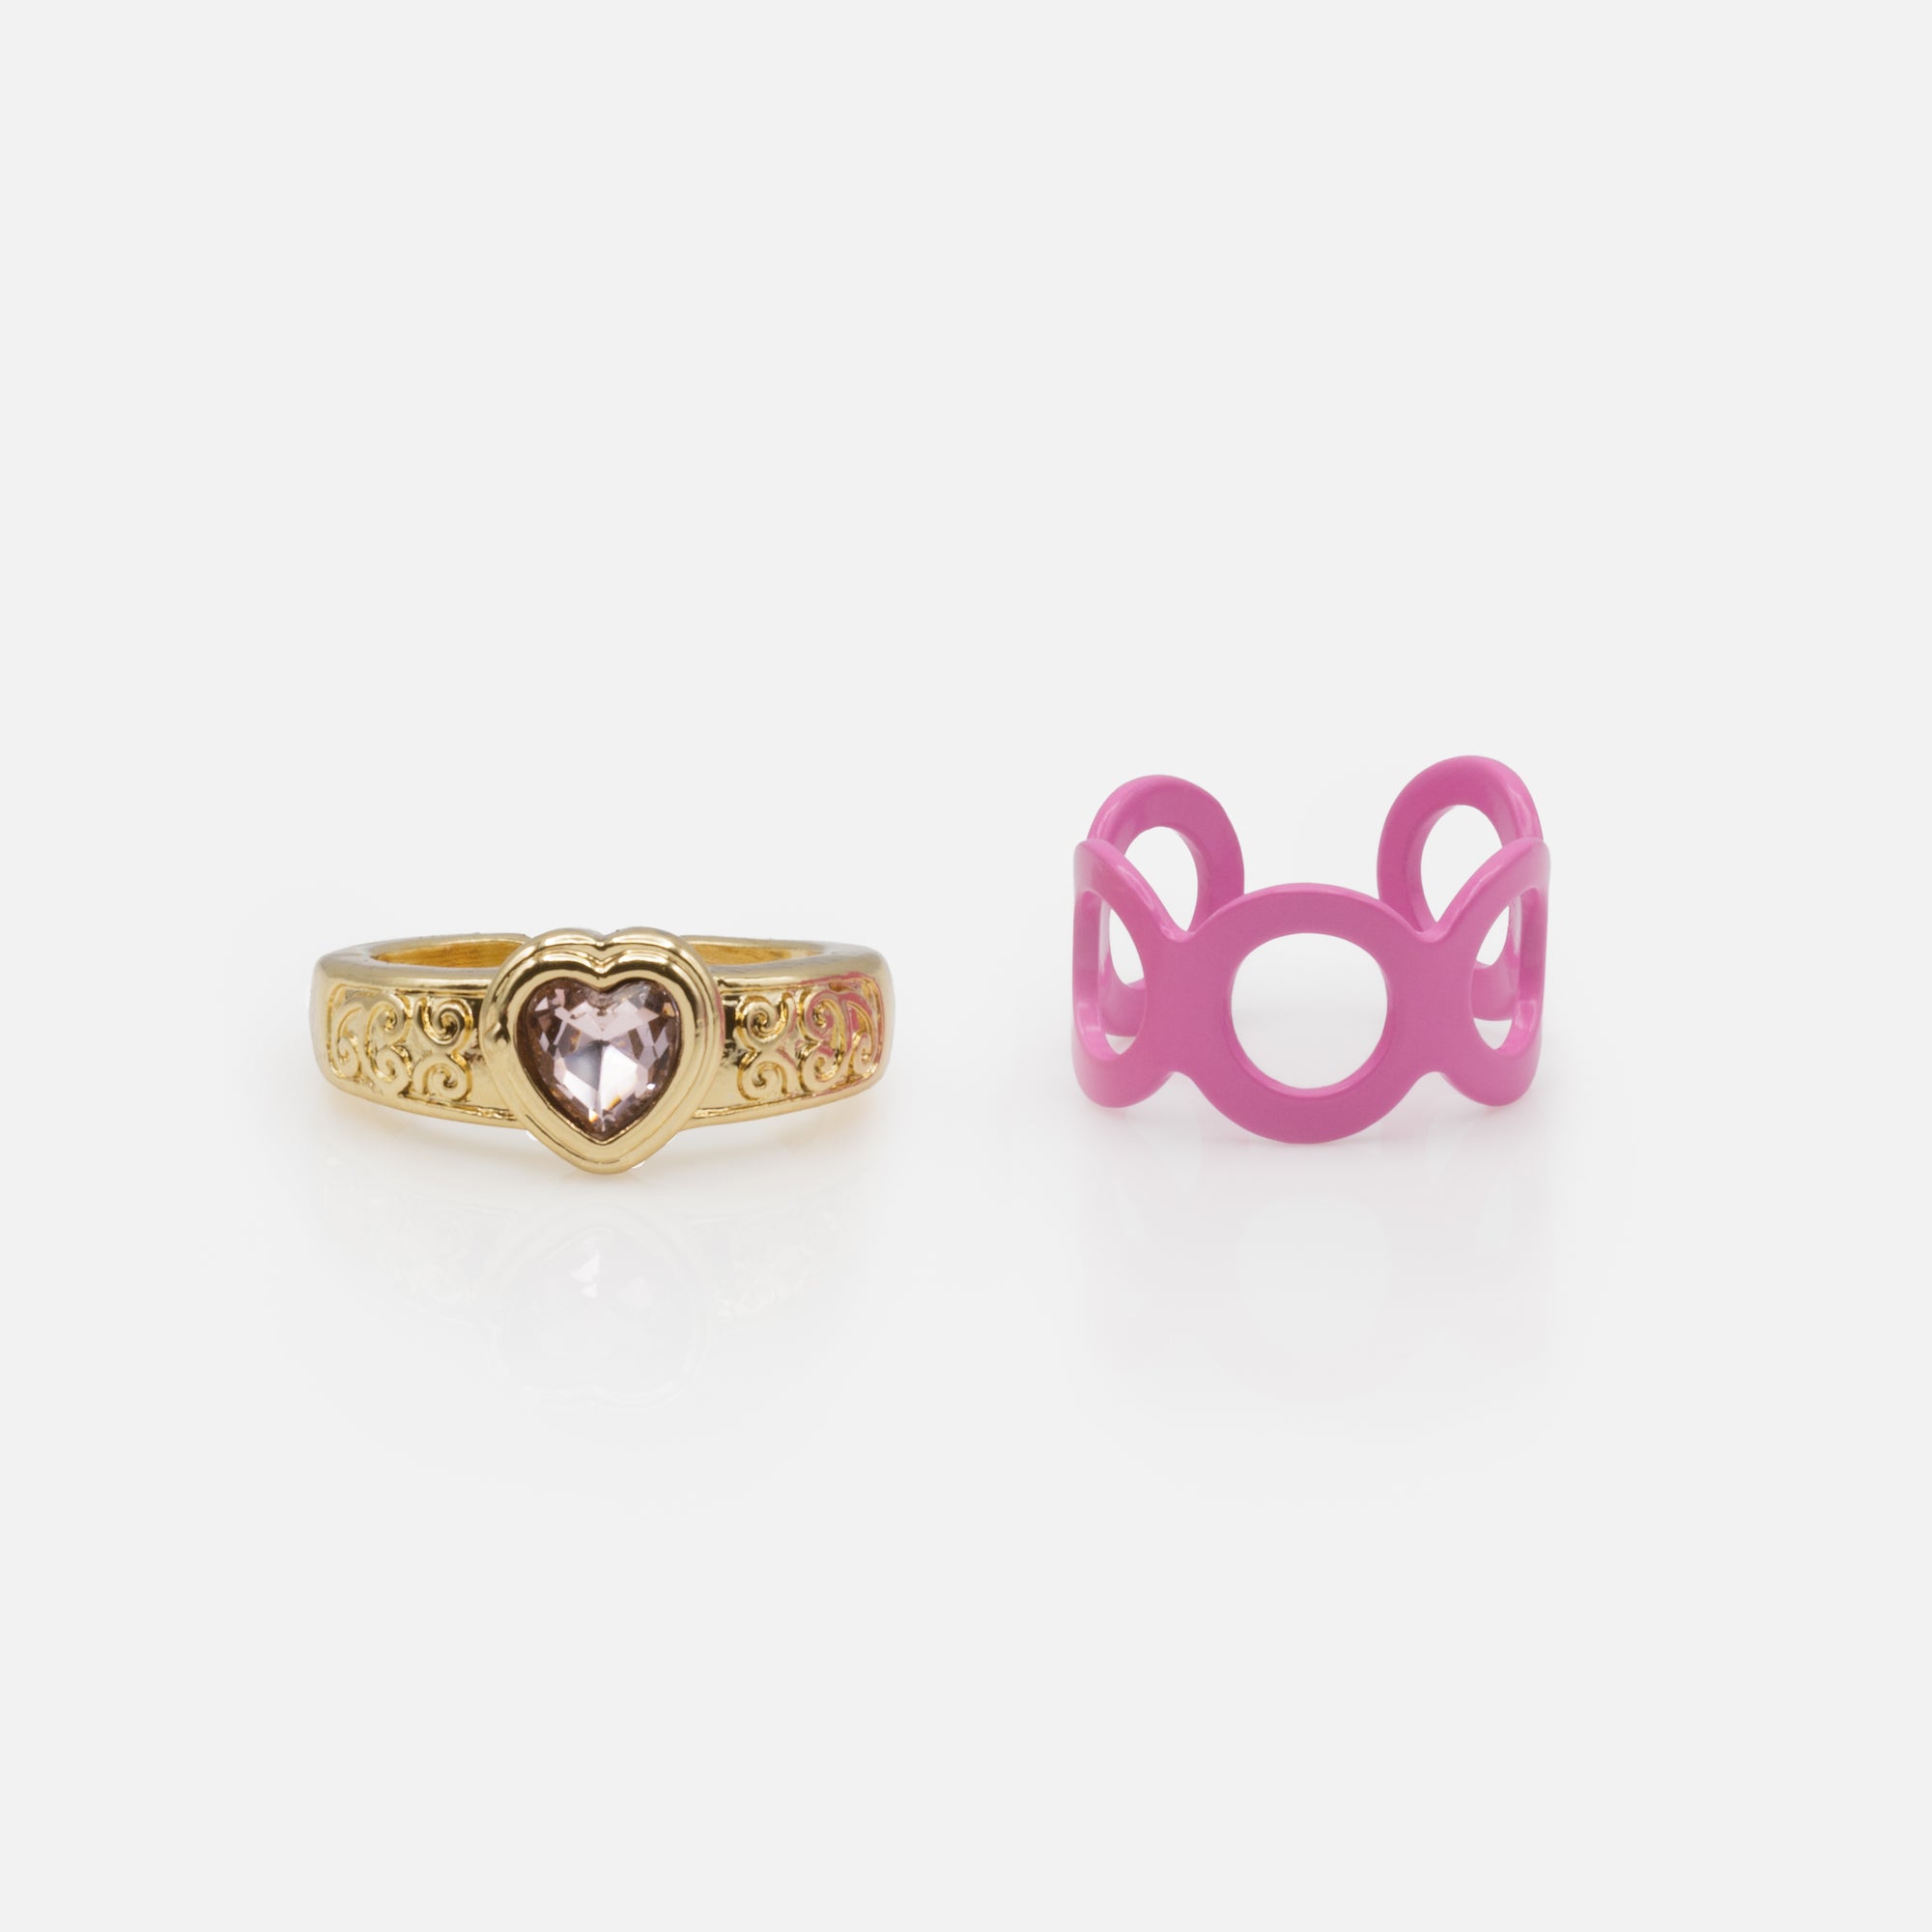 Set of two golden open rings with purple stone and pink serpentine